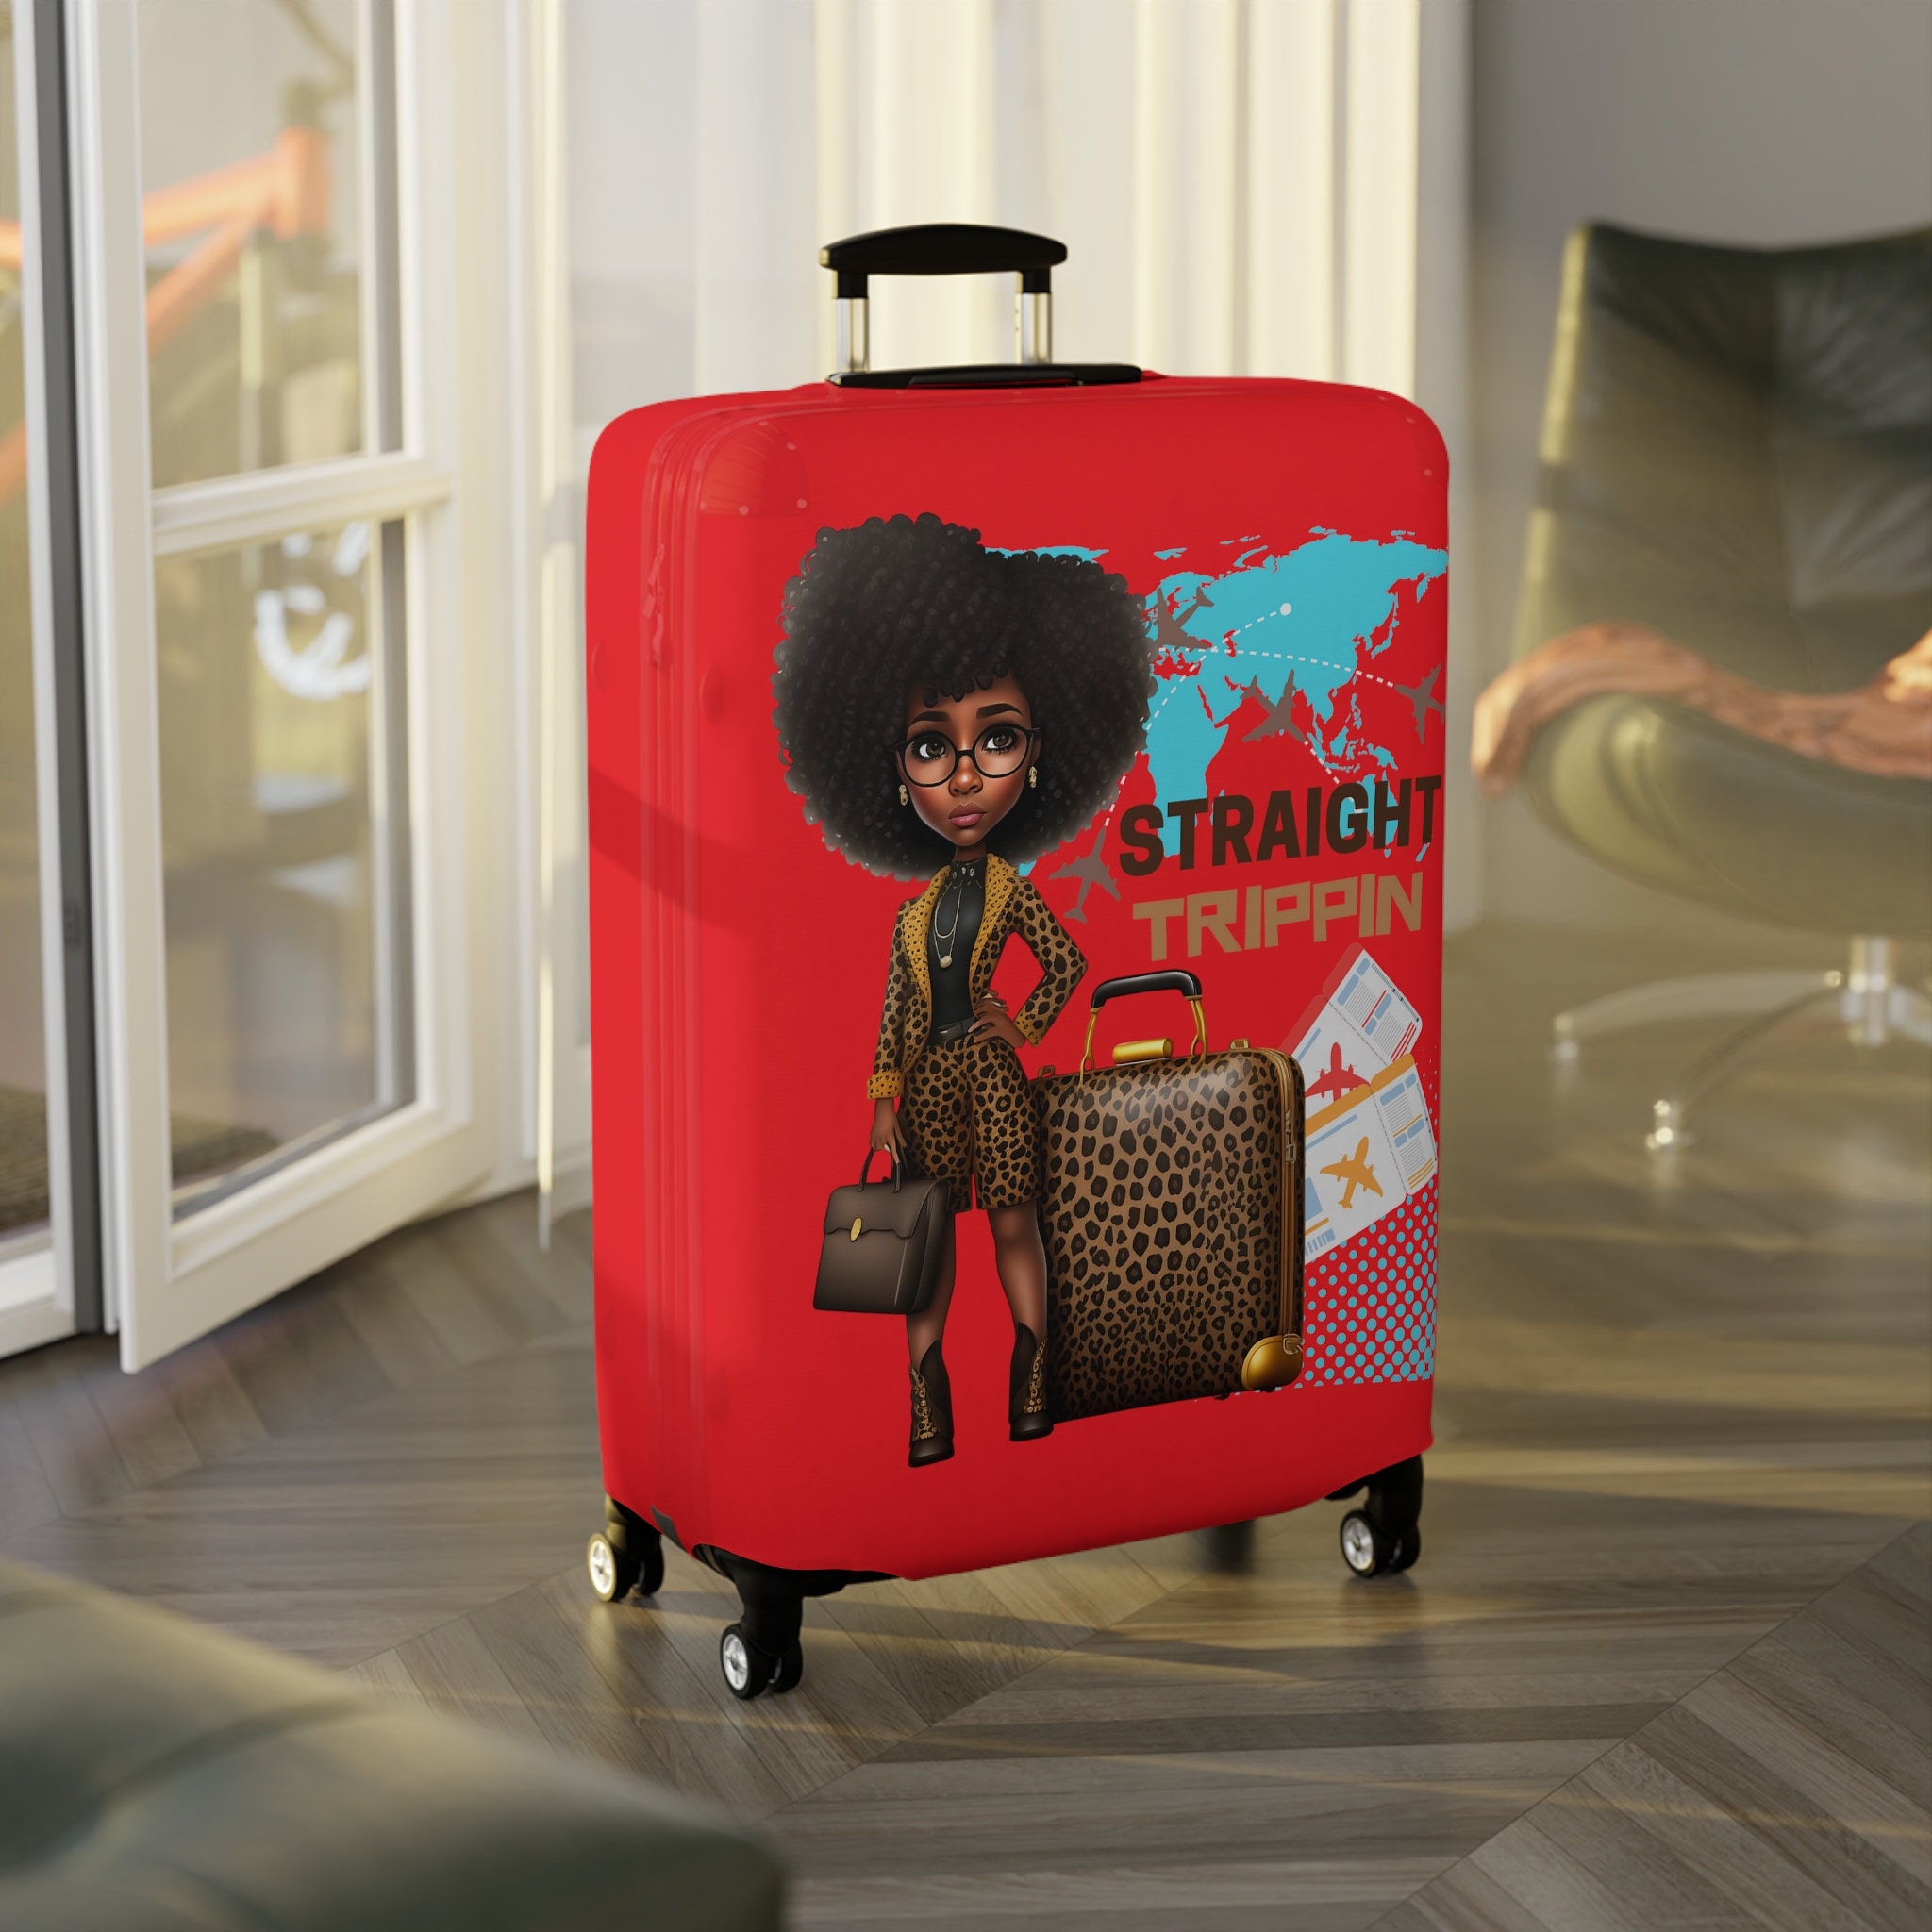 She's fierce and catching flights - "Straight Trippin" Luggage Cover